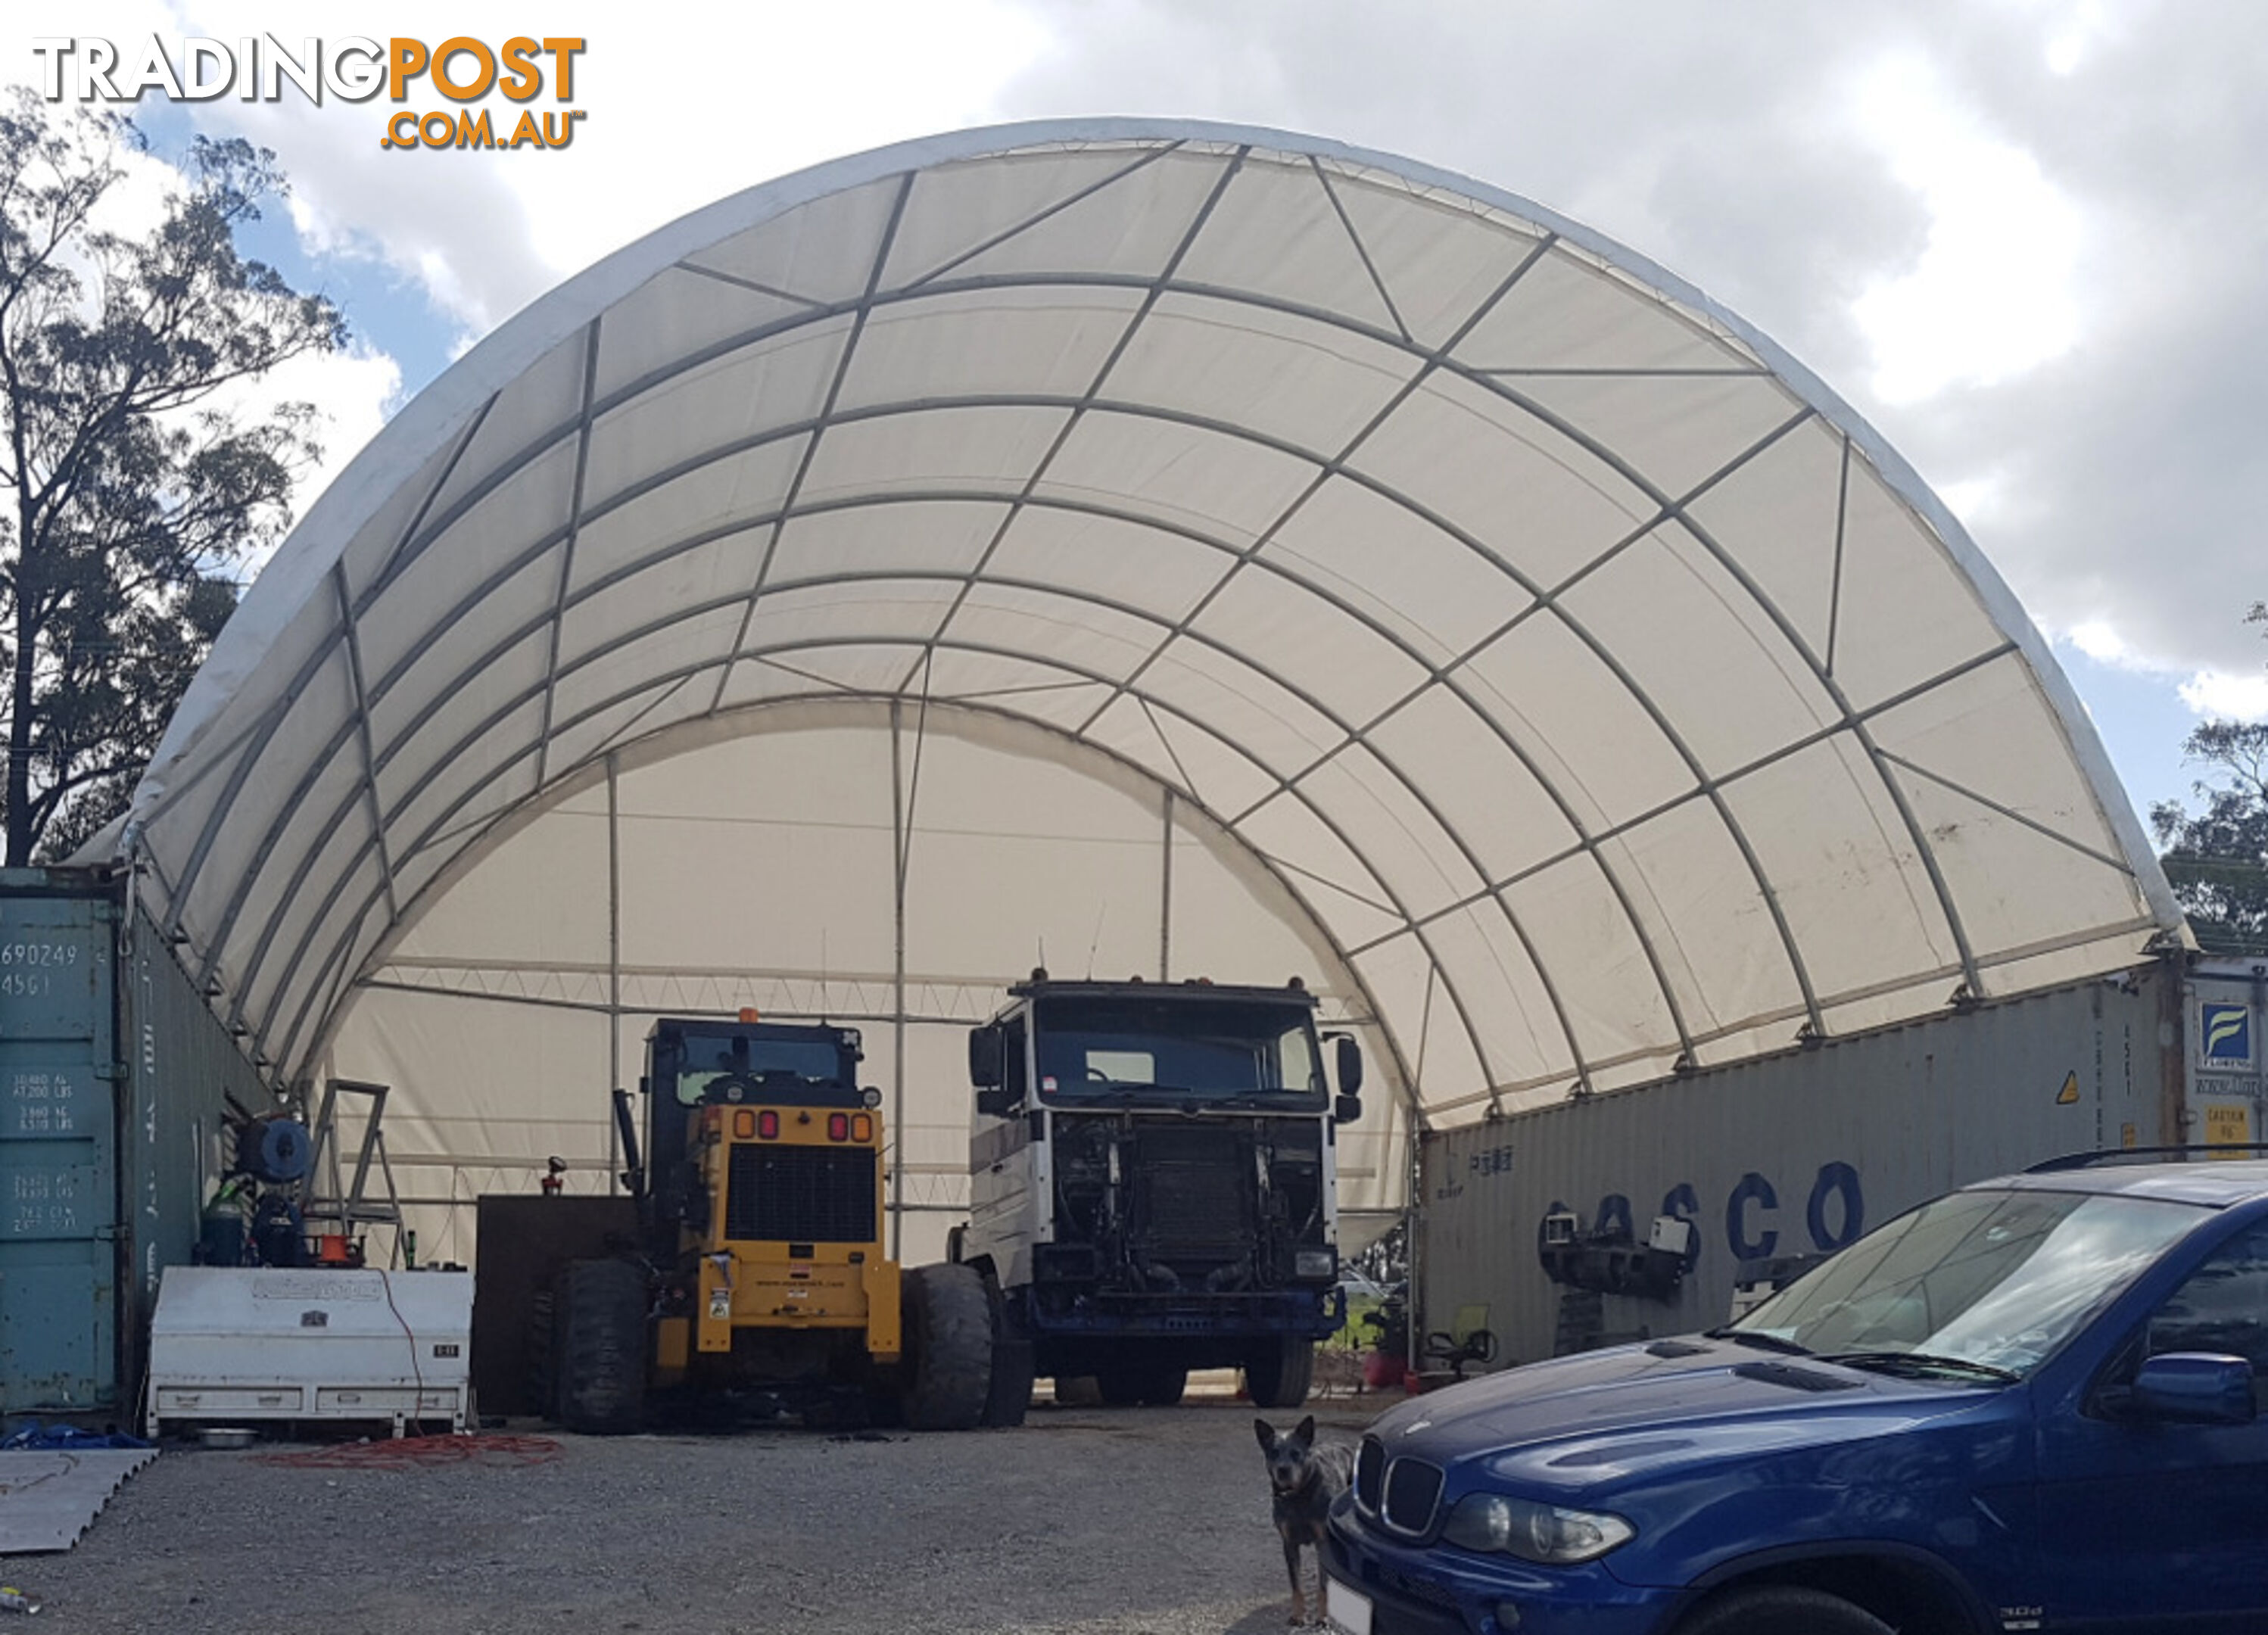 New 12m x 12m Container Shelter Workshop Igloo Dome with End Wall